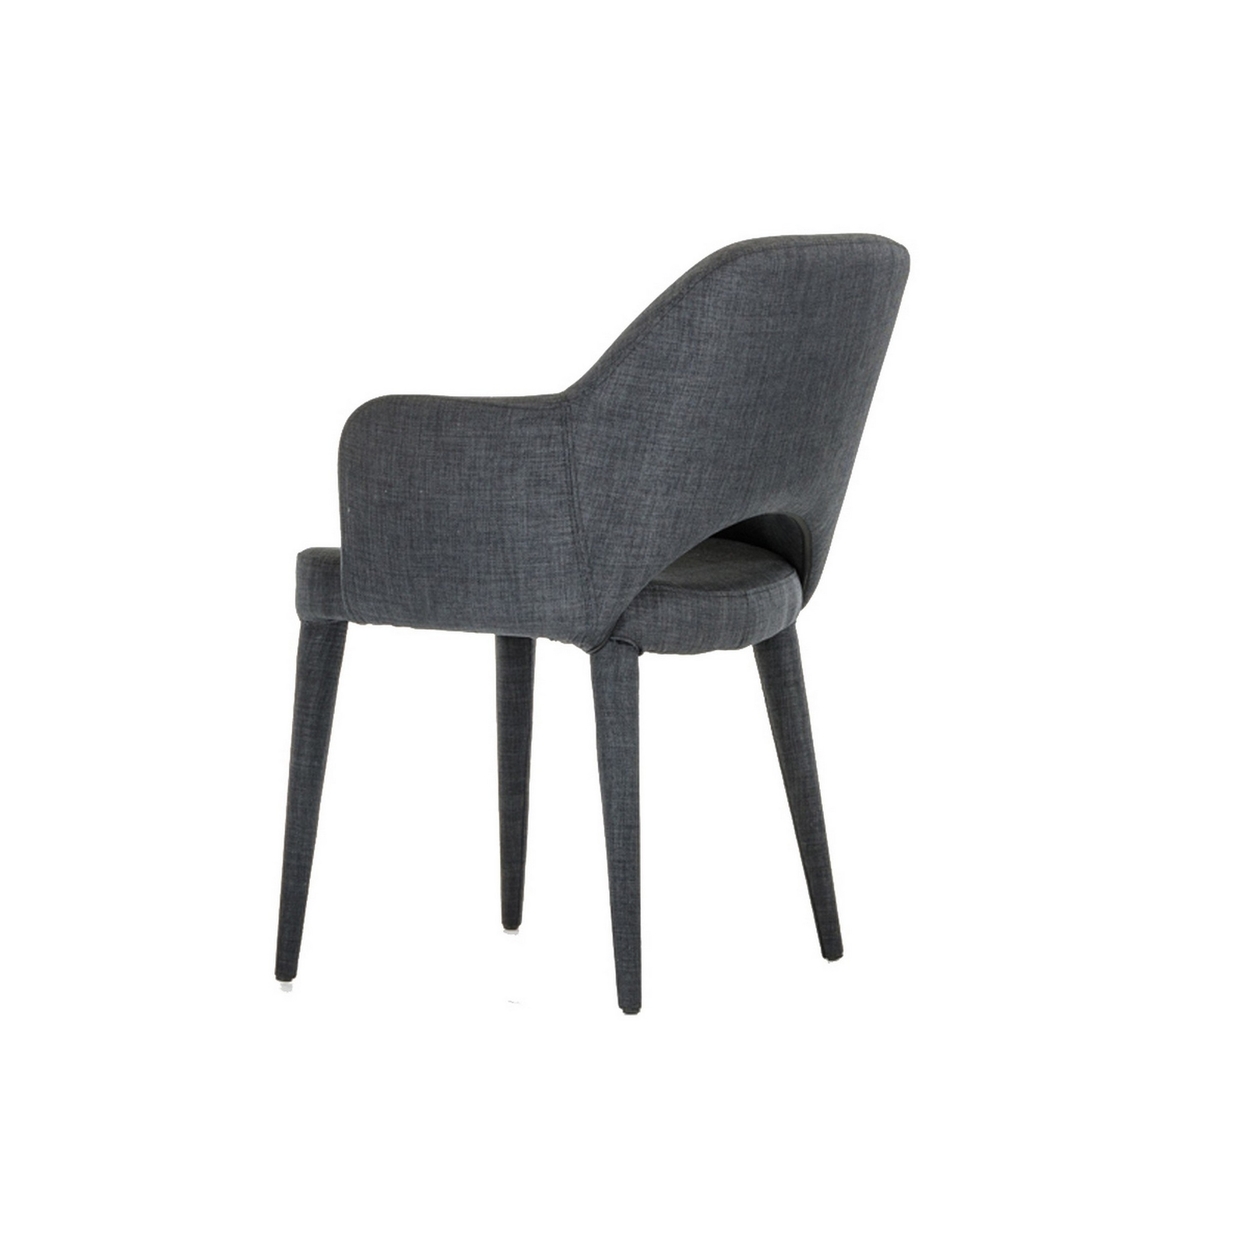 Fabric Upholstered Metal Dining Chair With Cutout Back Design, Gray- Saltoro Sherpi